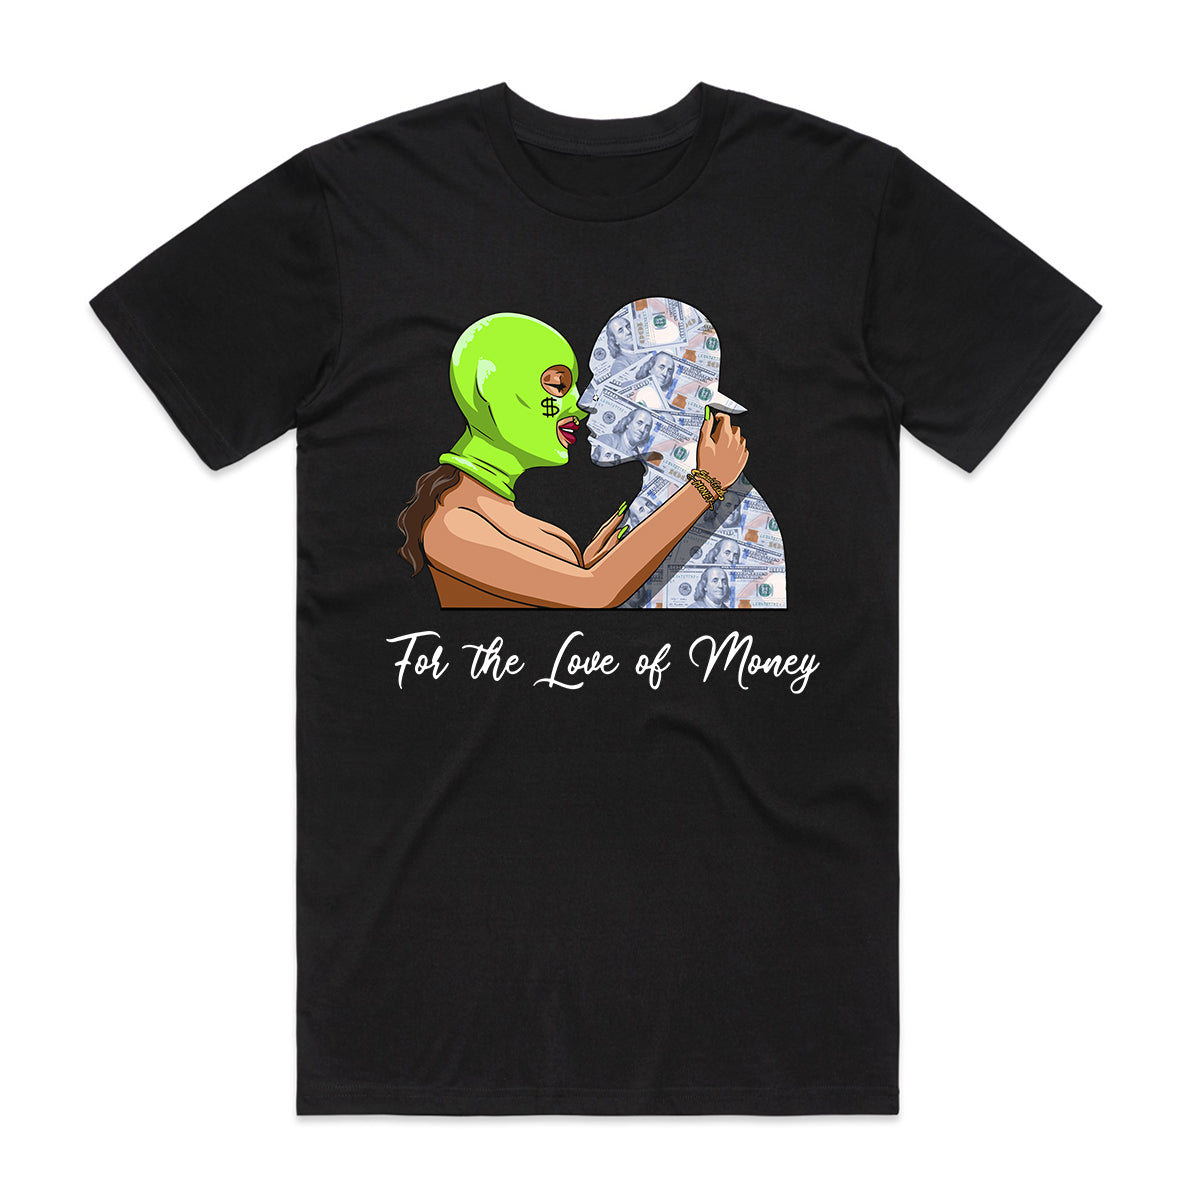 For The Love of Money Tee